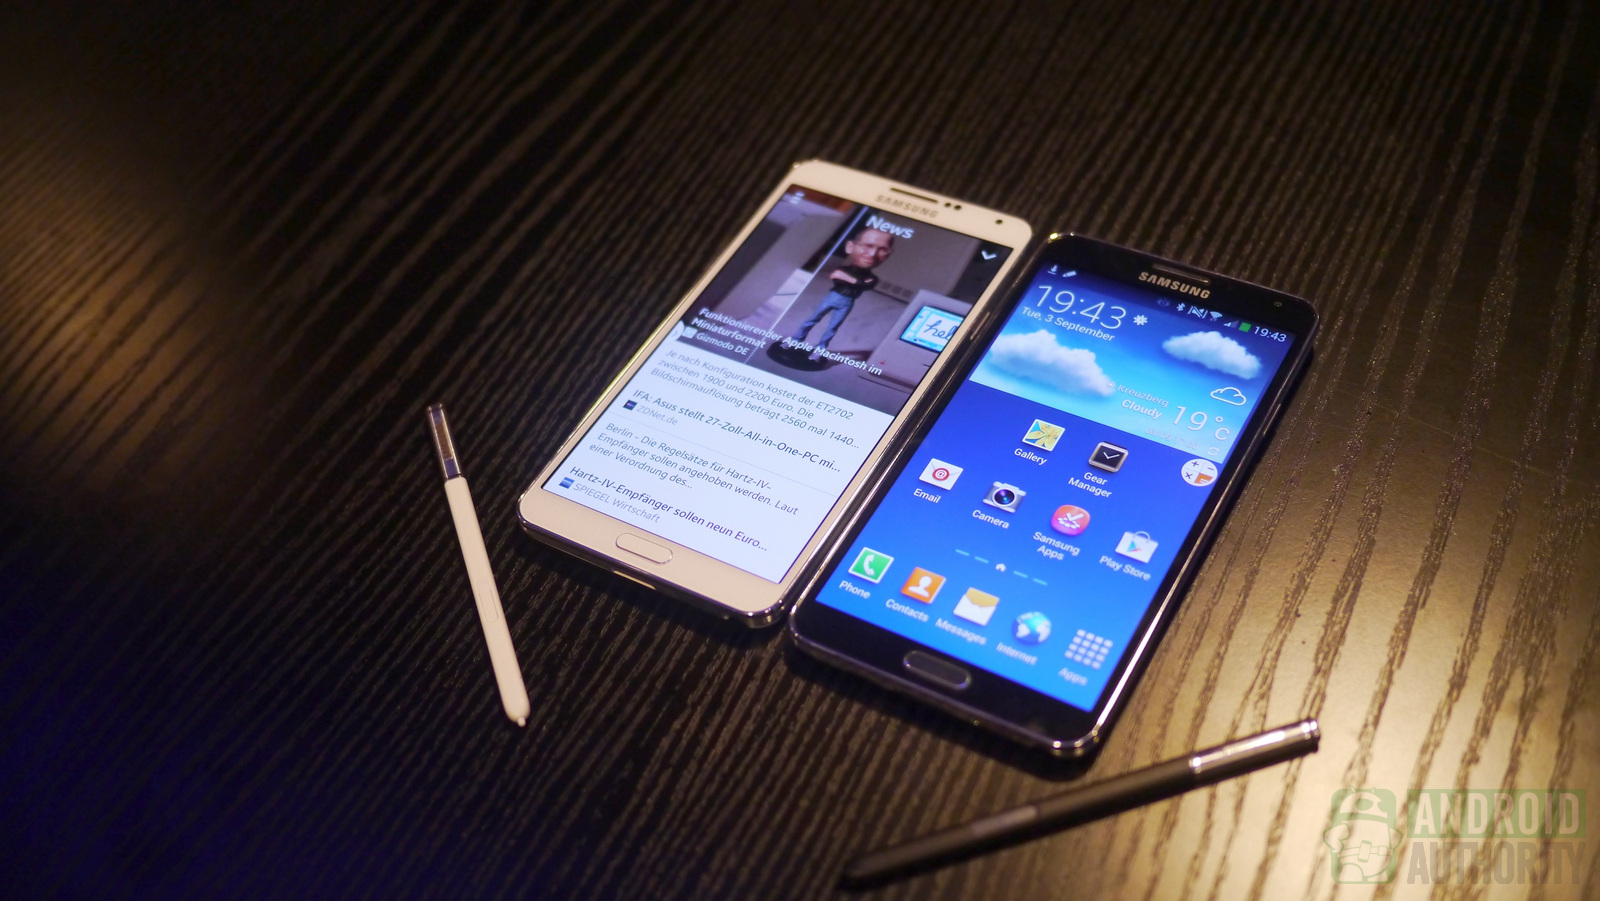 Both colors of the Samsung Galaxy Note 3.